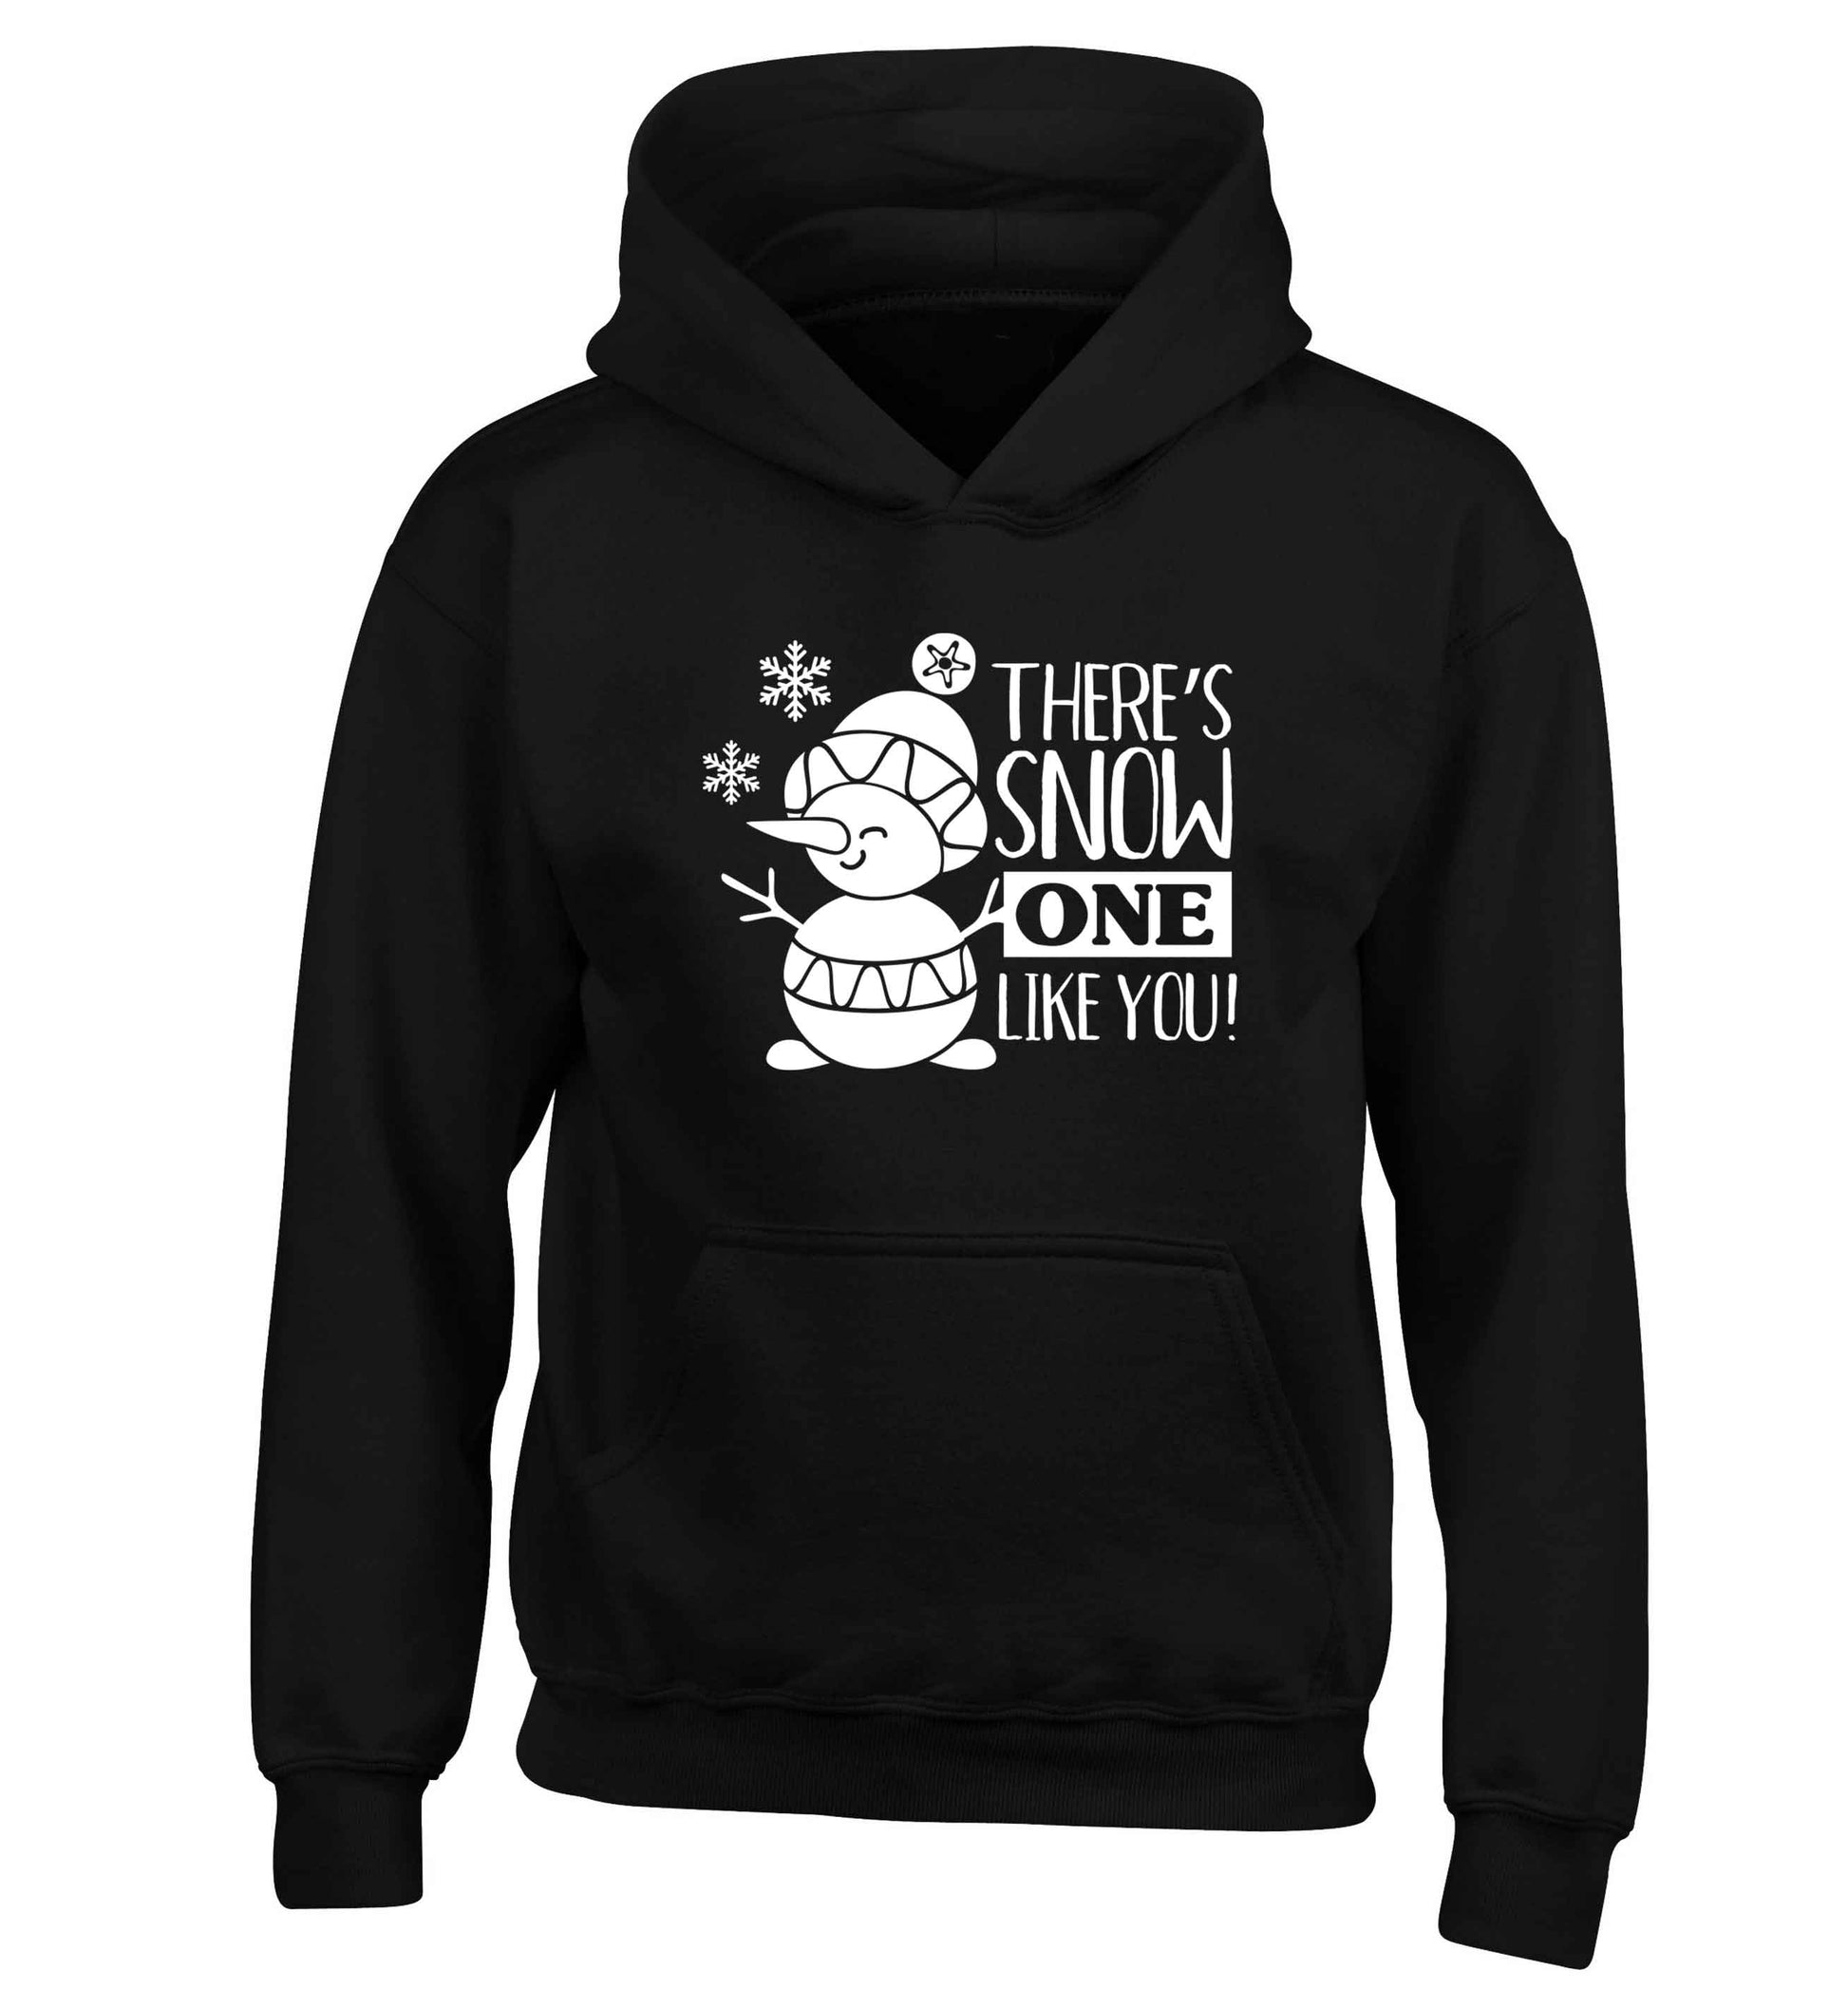 There's snow one like you children's black hoodie 12-13 Years